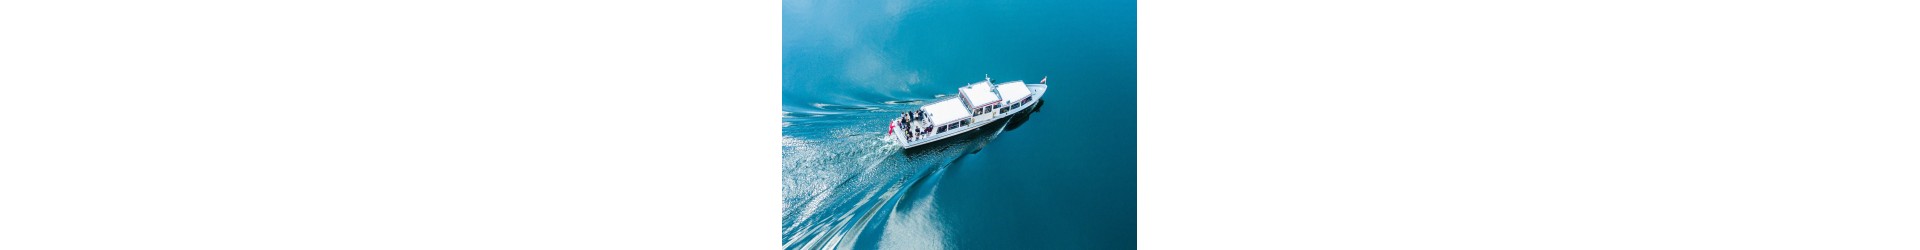 Experience an Exciting and Fascinating Adventure at Sea! AVEMTO